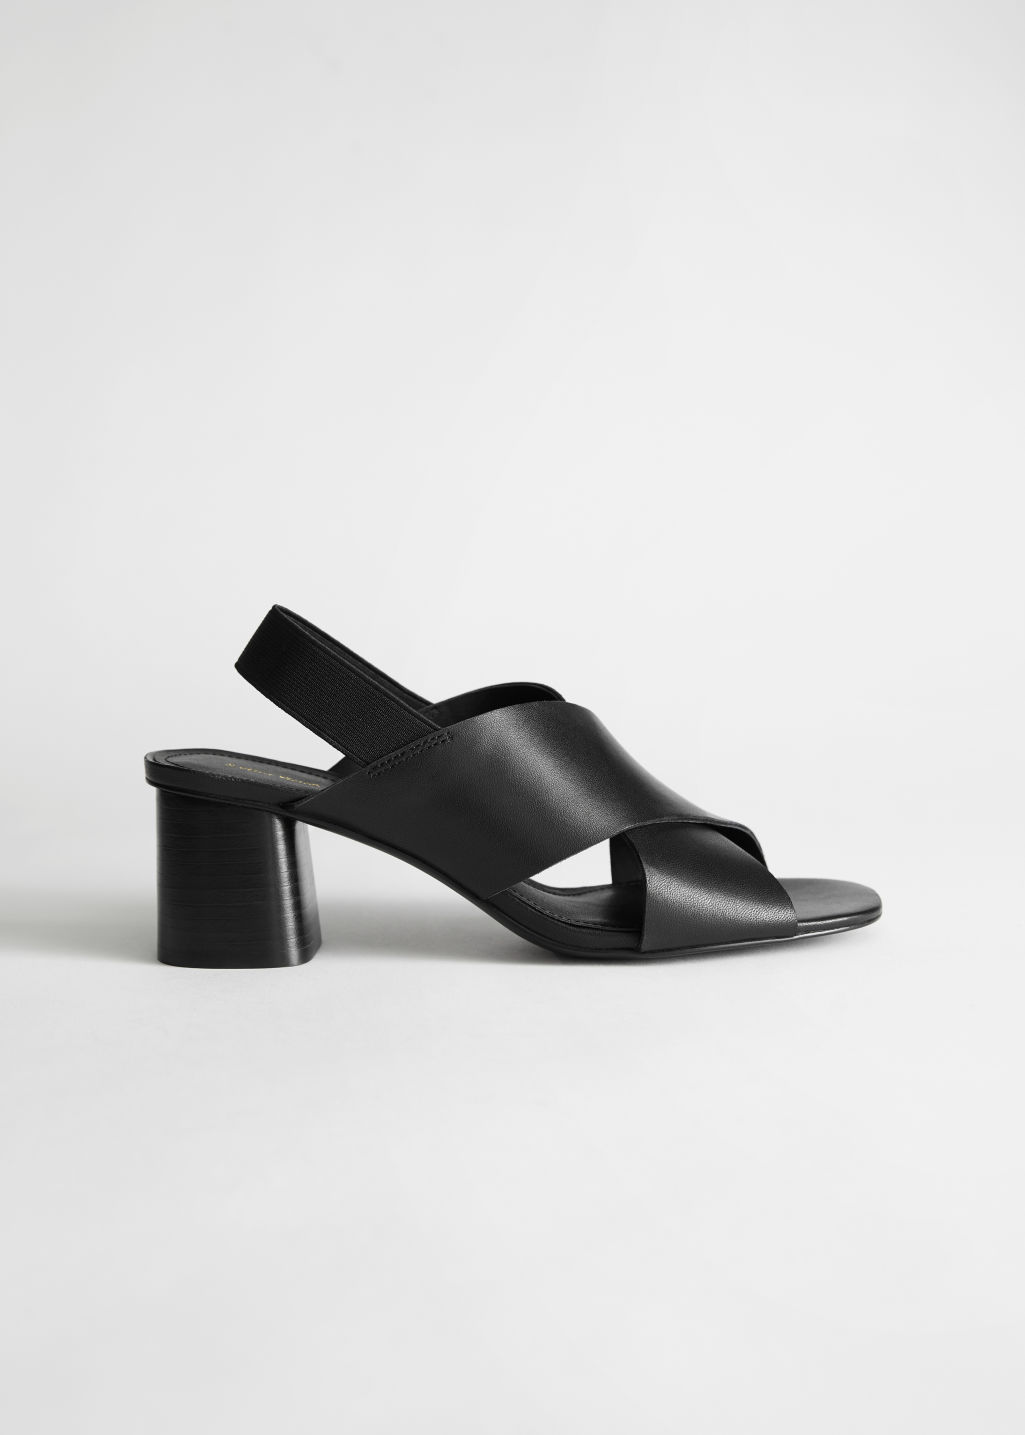 Criss Cross Heeled Leather Sandals - Black - Heeled sandals - & Other Stories